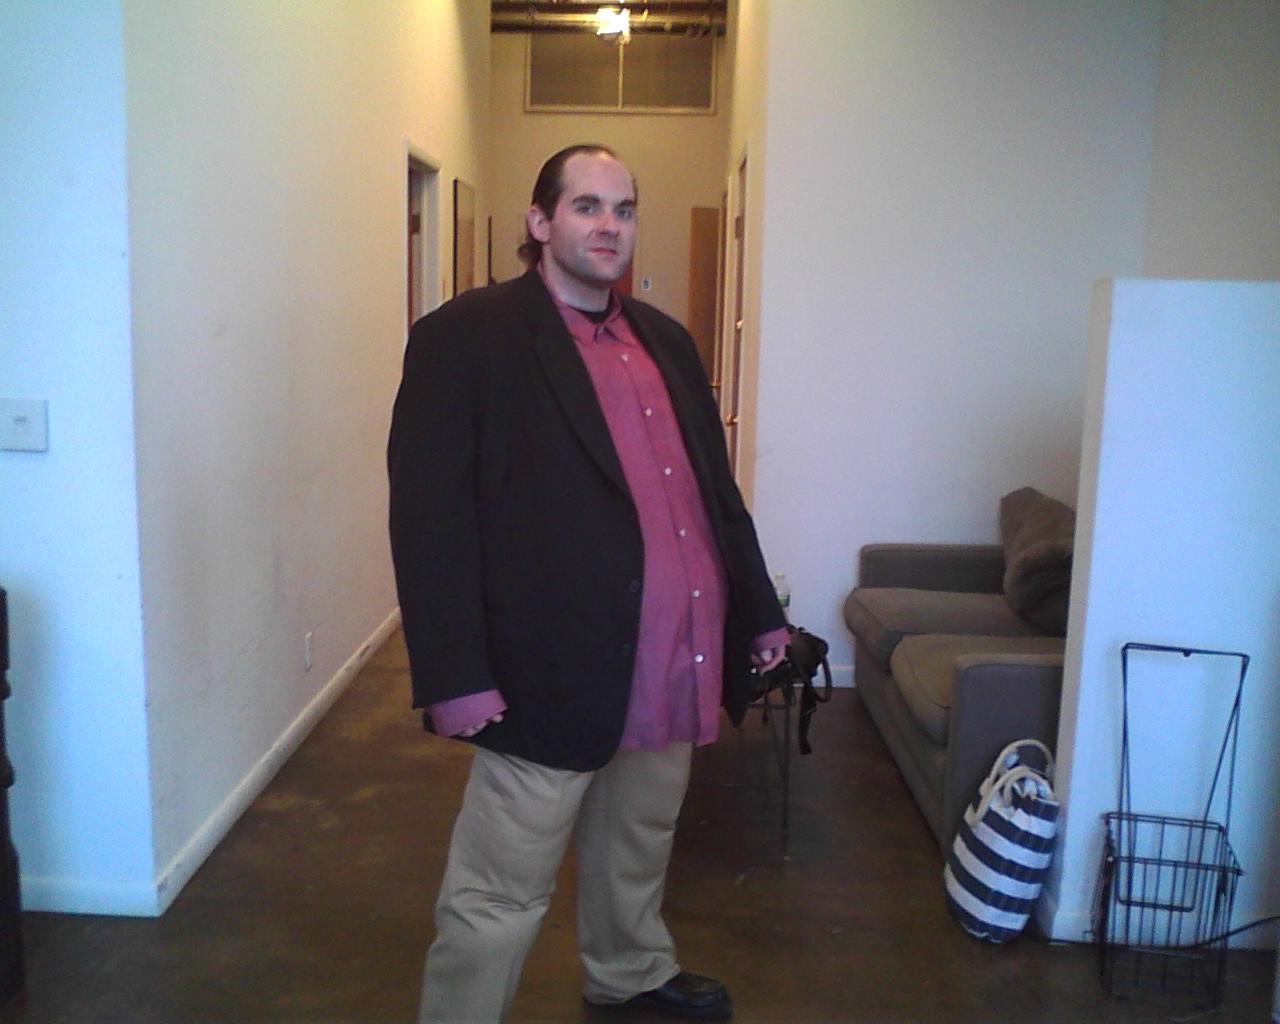 As the morbidly obese Joe Fama on the set of 